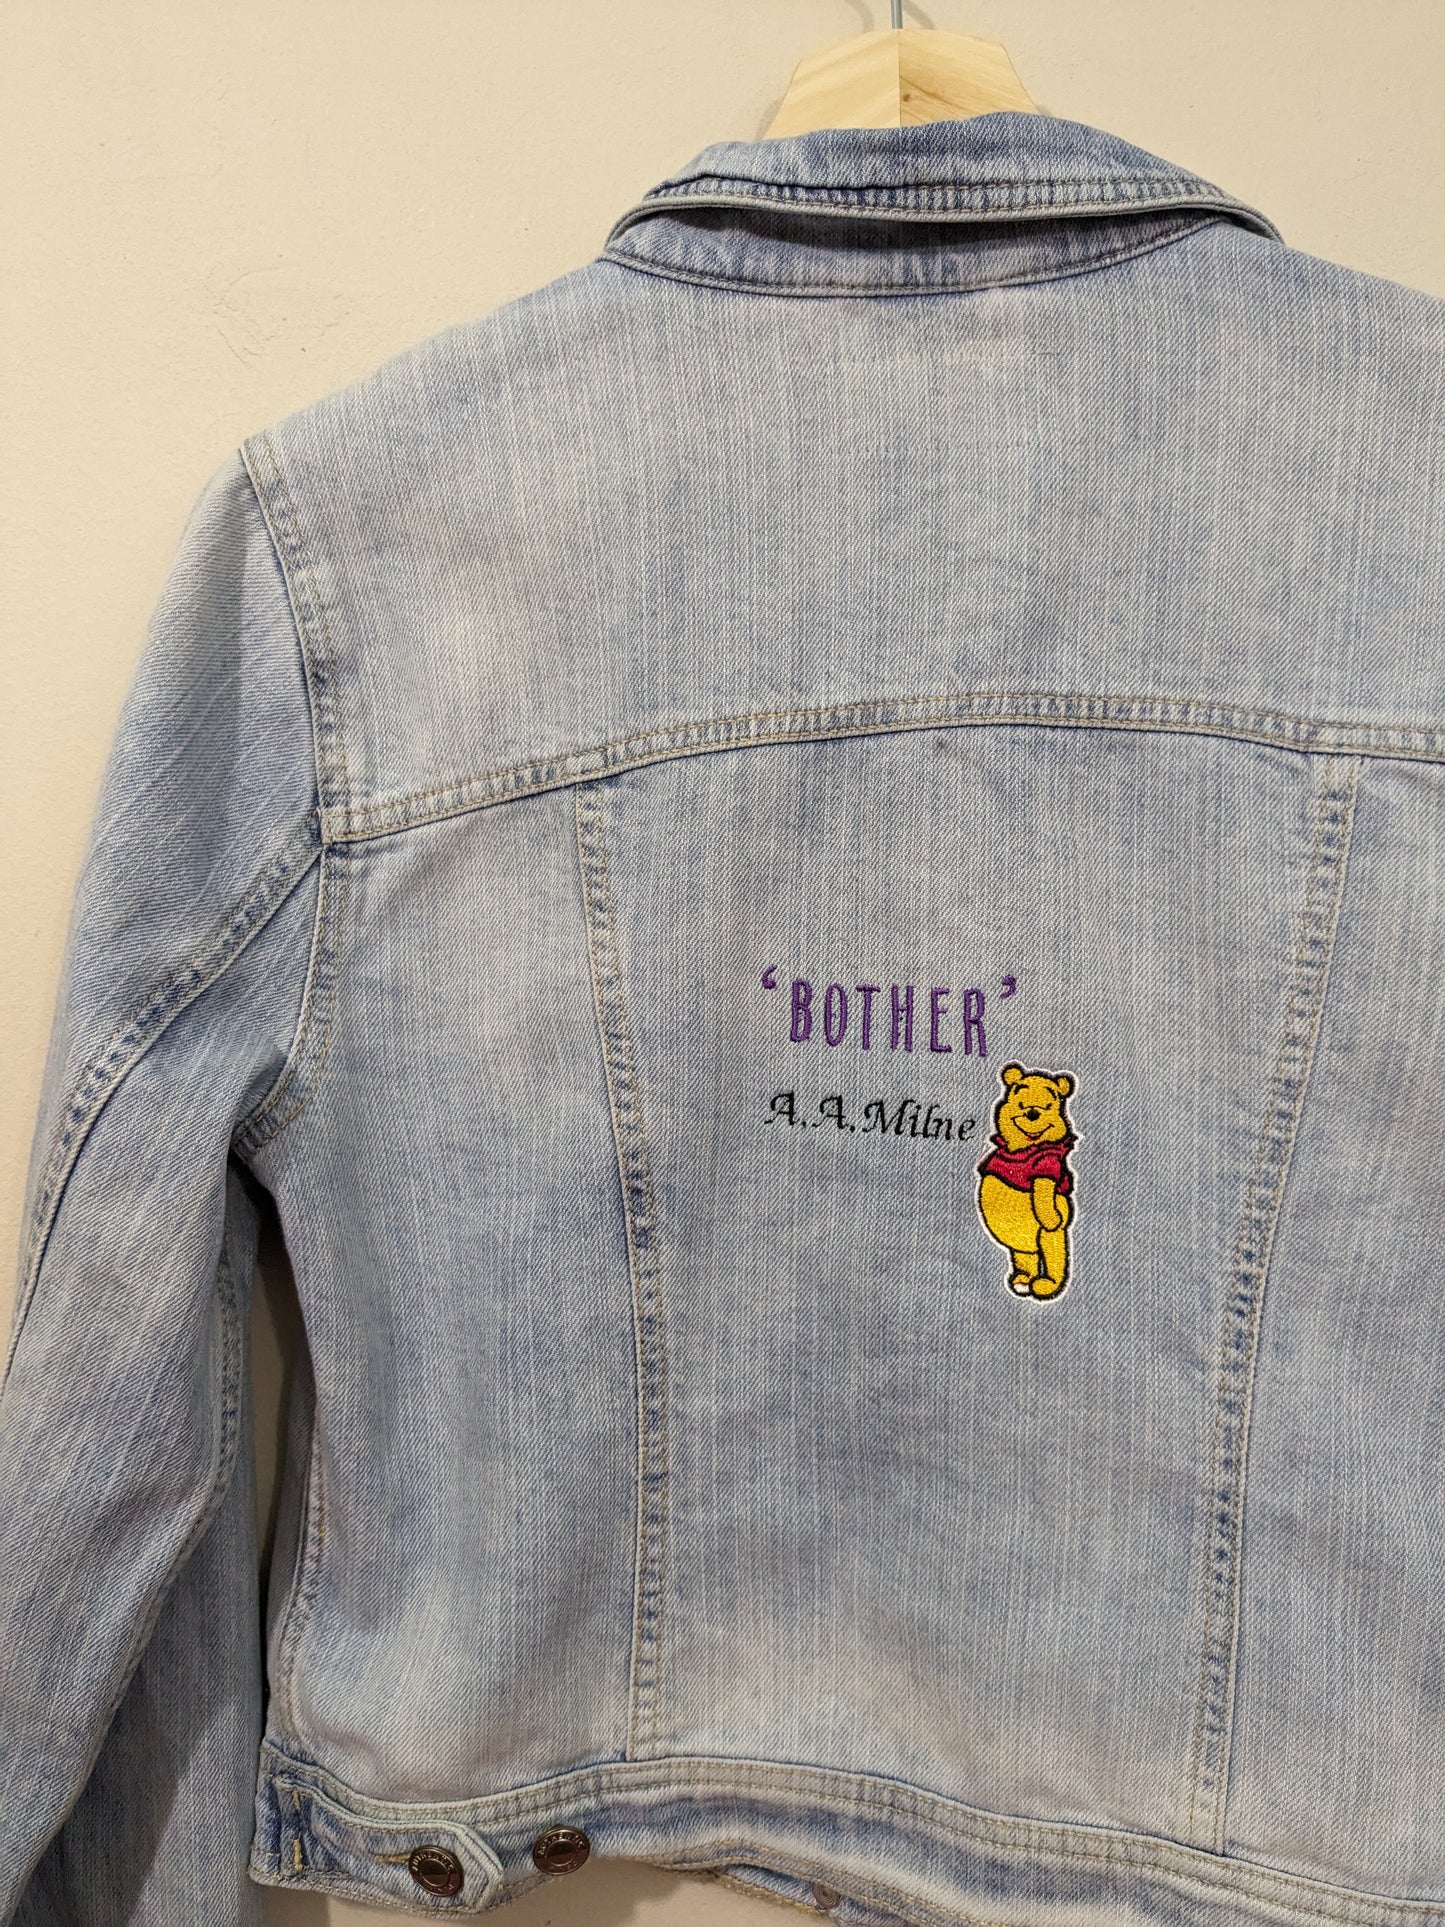 Size 12 Light Blue Denim Jacket - Reworked - Embroidered Winnie the Pooh, A. A. Milne Quote -